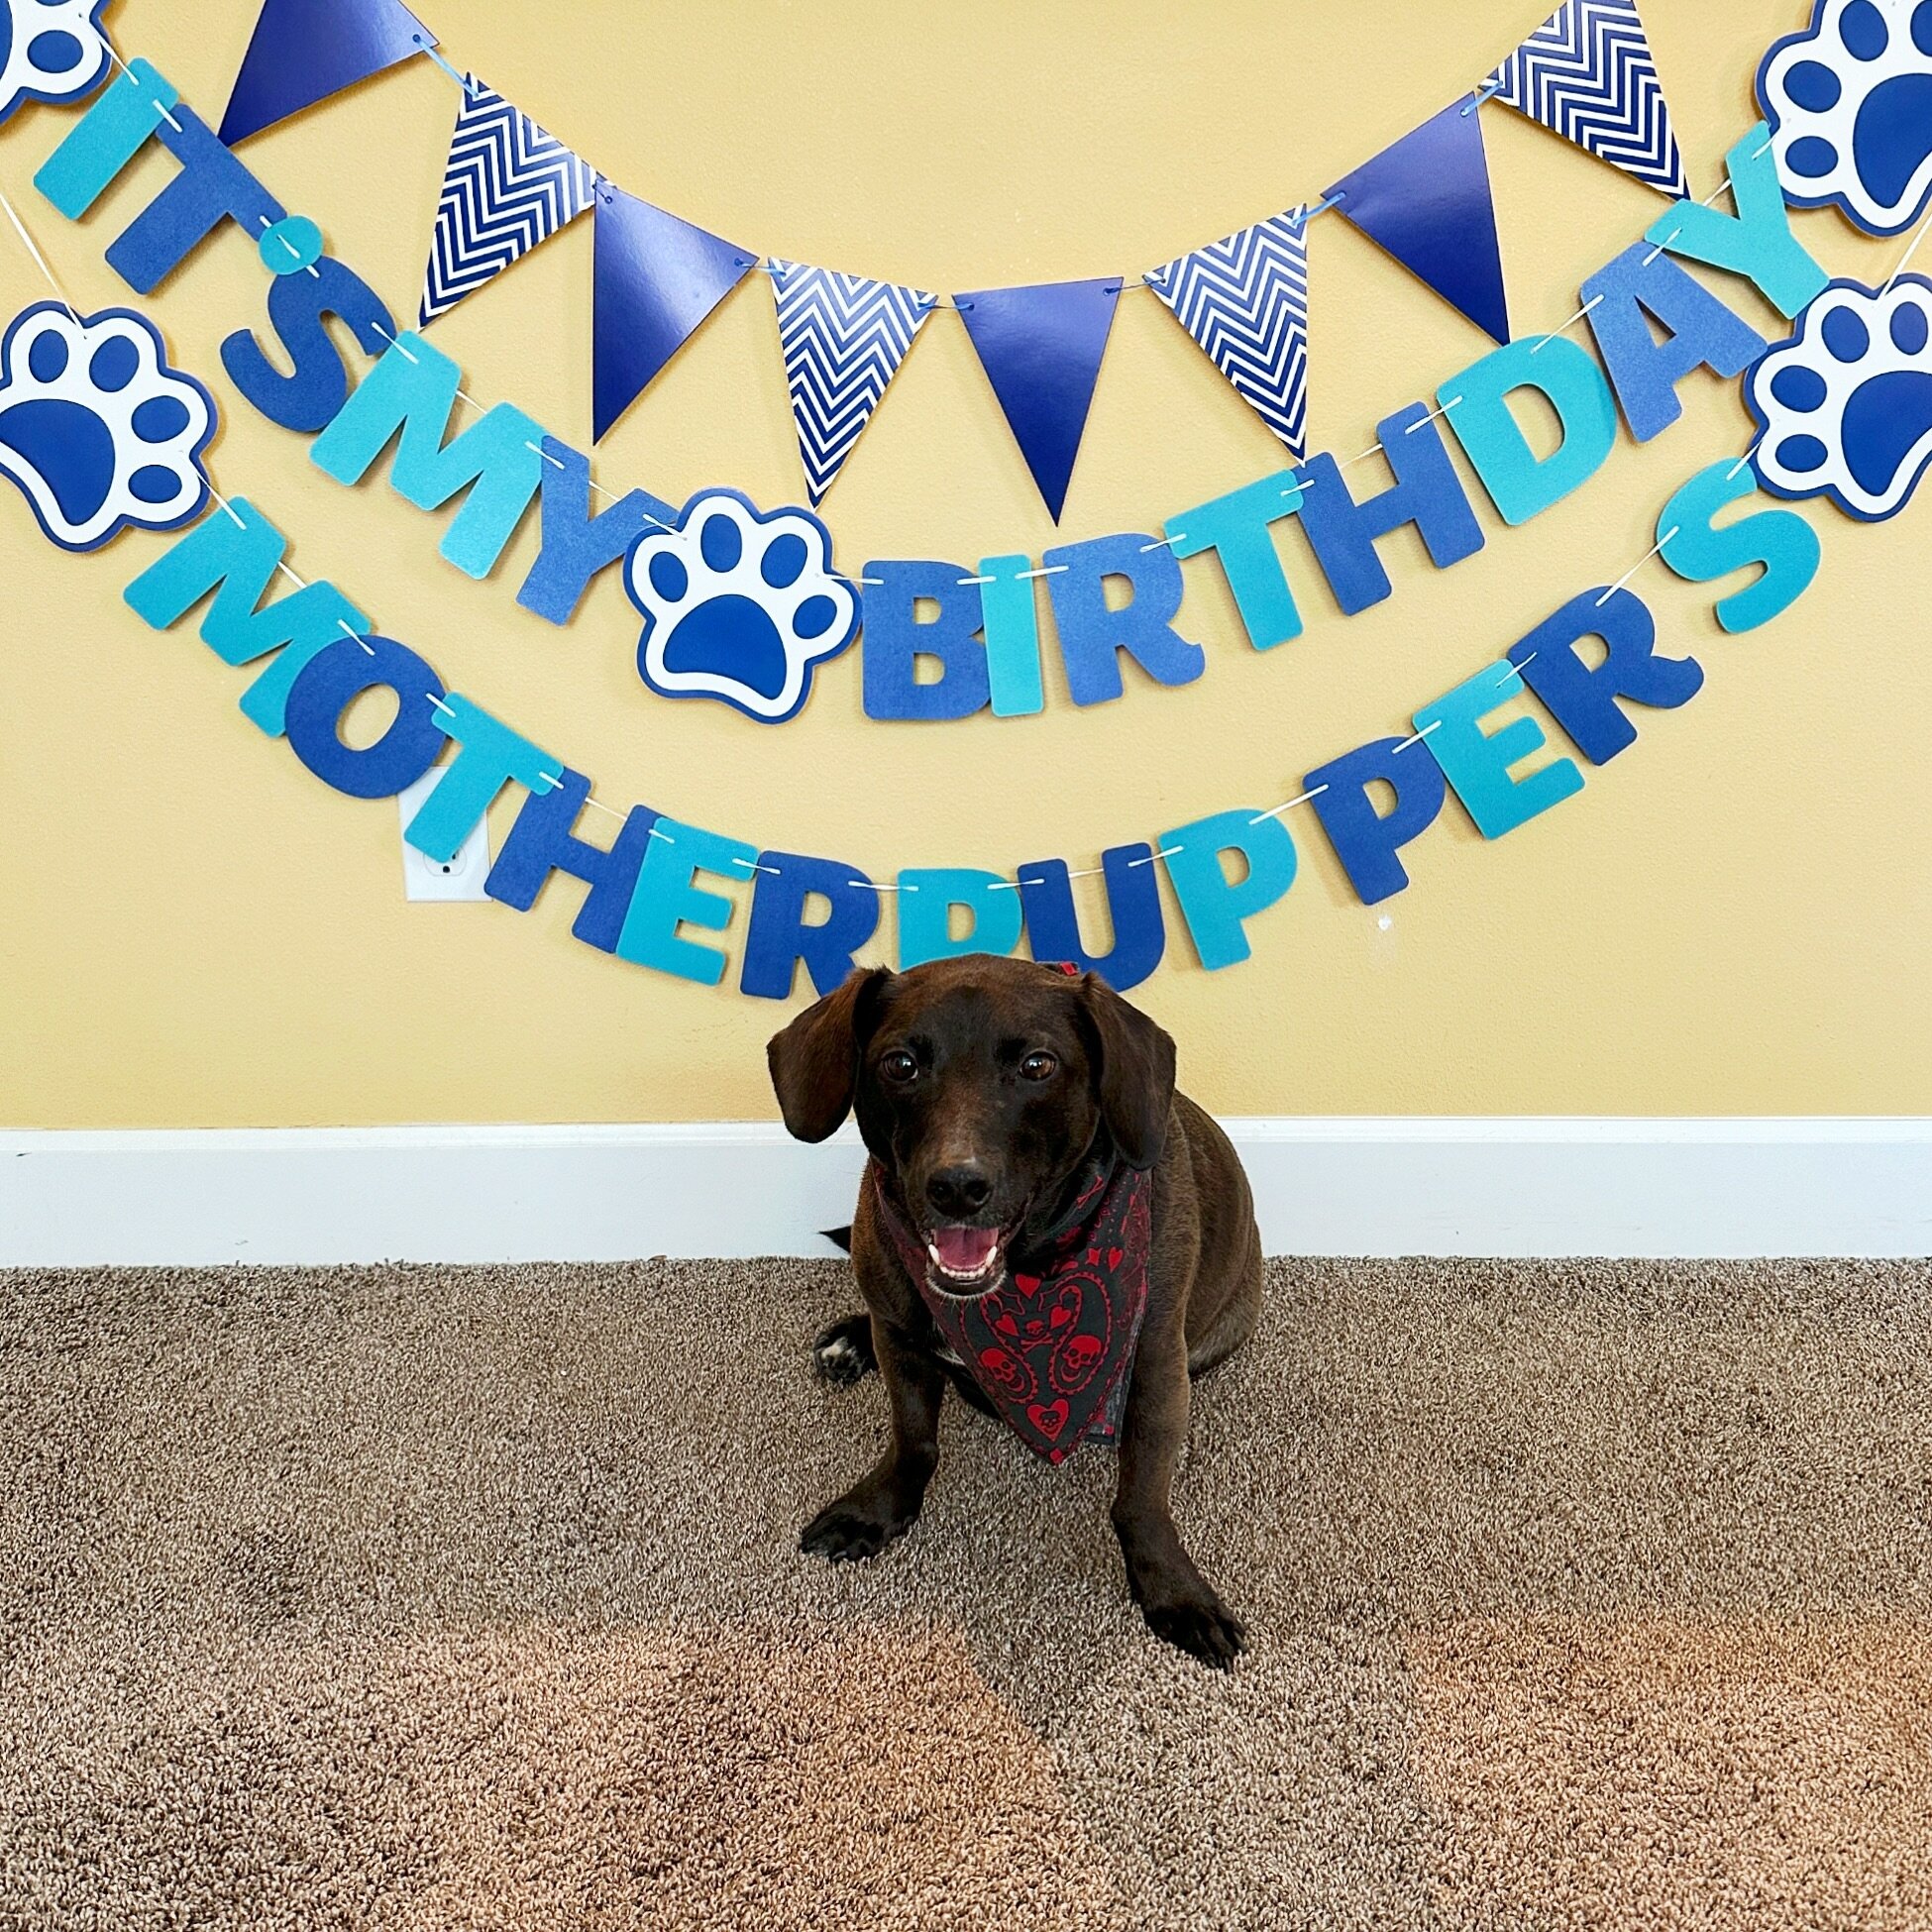 Happy 4th puppy birthday to baby Benj!!! 🎂🥳🎉 we made sure he was spoiled with doggy ice cream, pressies, a walk and more treats! Oh and an upcoming trip to the beach to celebrate 😜